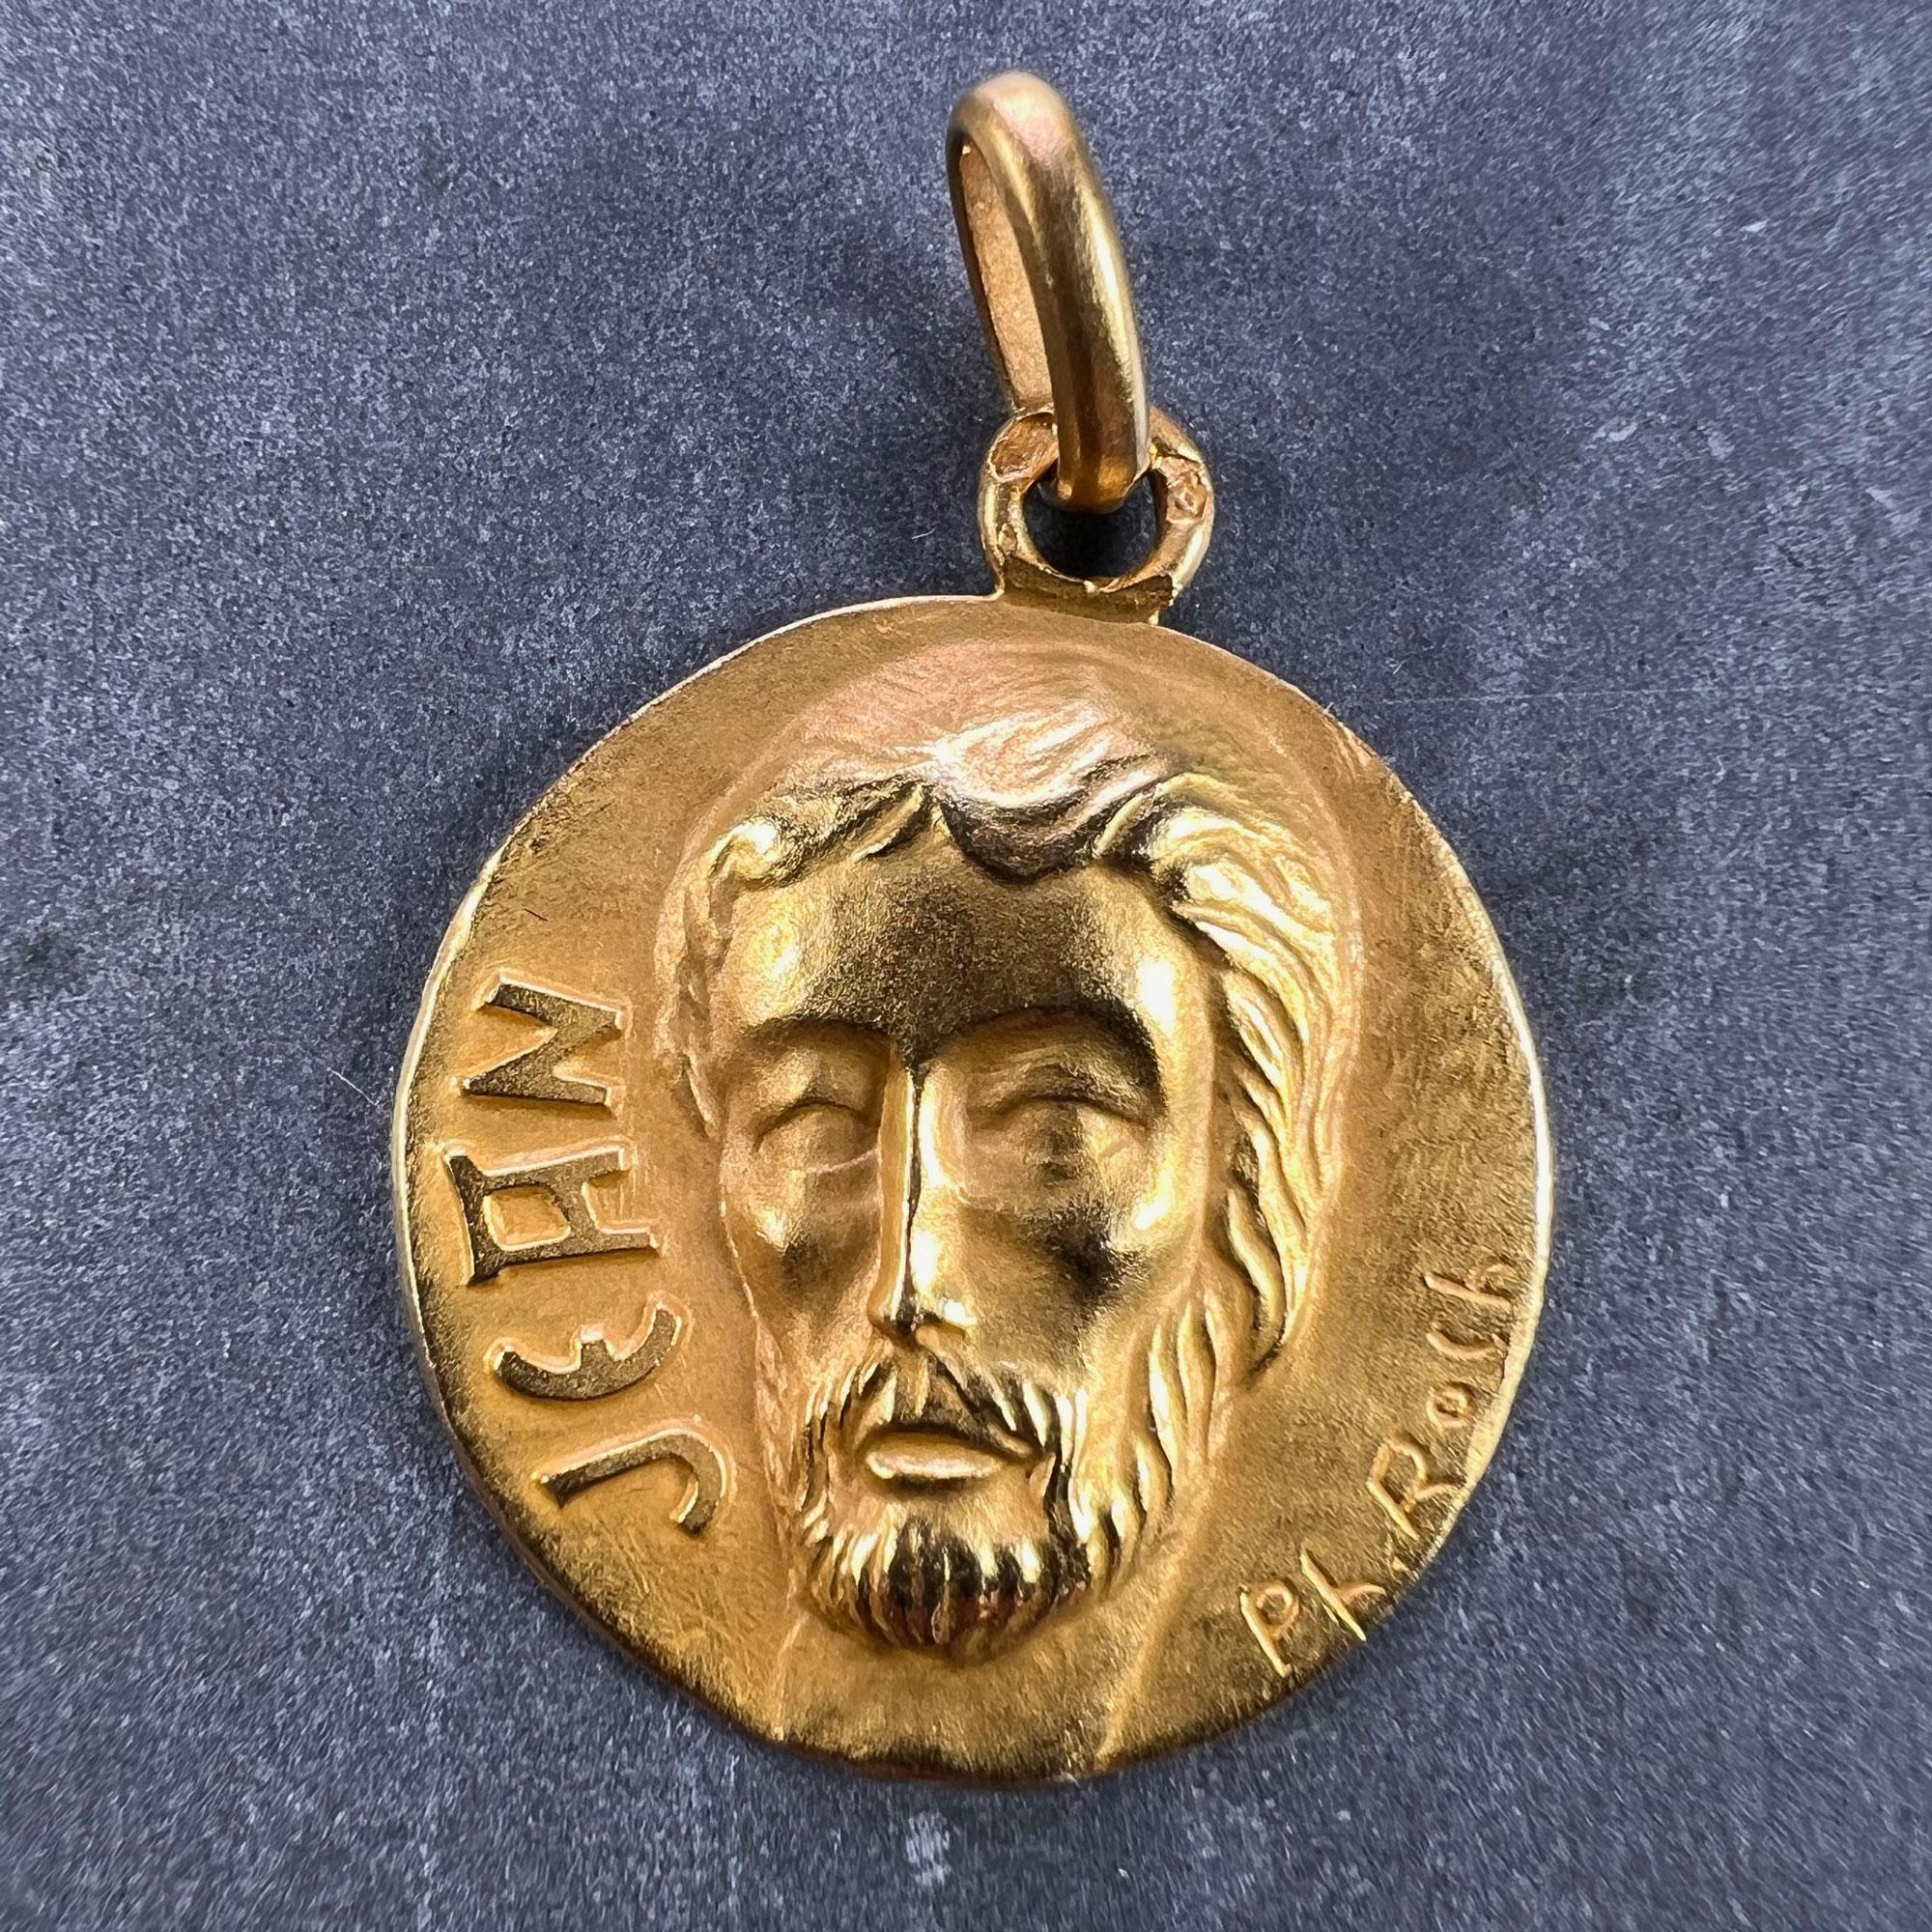 A French 18 karat (18K) yellow gold charm pendant designed as a medal representing the head of Saint John the Baptist, with the name 'Jean' in raised letters to one side. Signed PL Roch, stamped with the eagle's head for French manufacture and 18